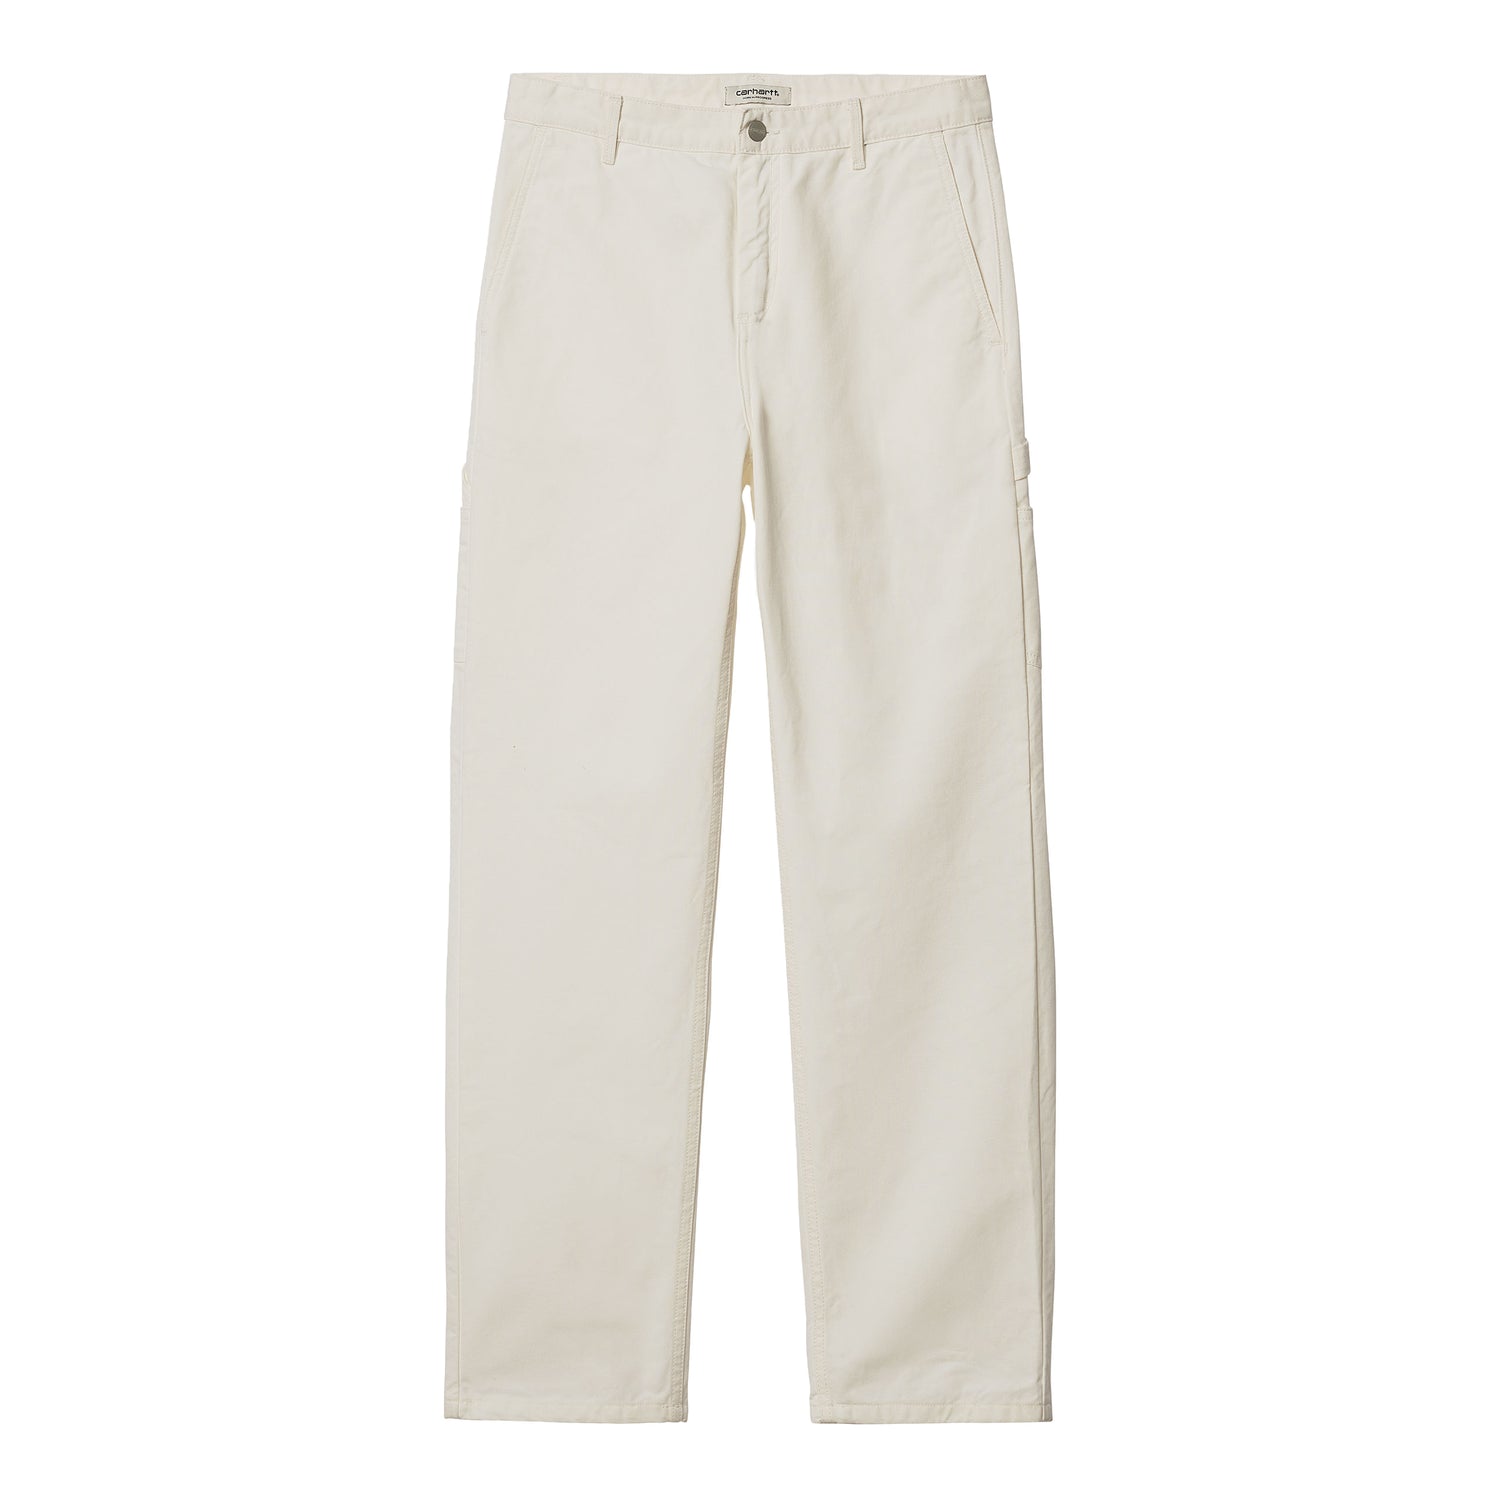 W' PIERCE PANT STRAIGHT OFF-WHITE RINSED